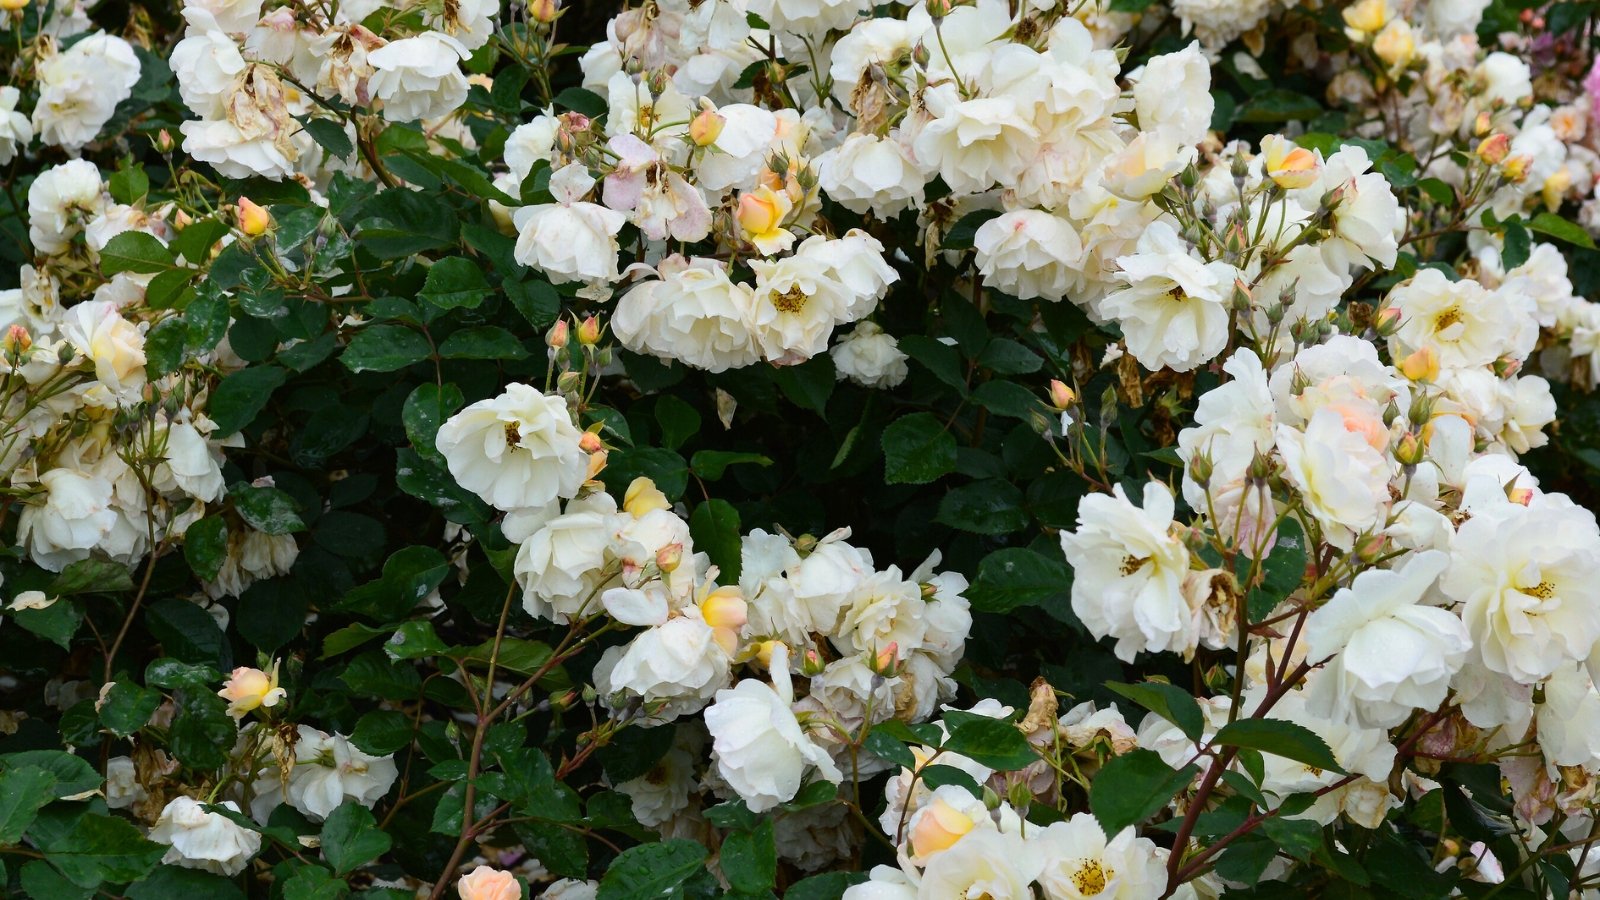 Close-up of a lush bush of Rosa ‘Penelope’ which features robust, thorny stems, glossy green leaves, and clusters of semi-double, creamy white flowers with a hint of pink.